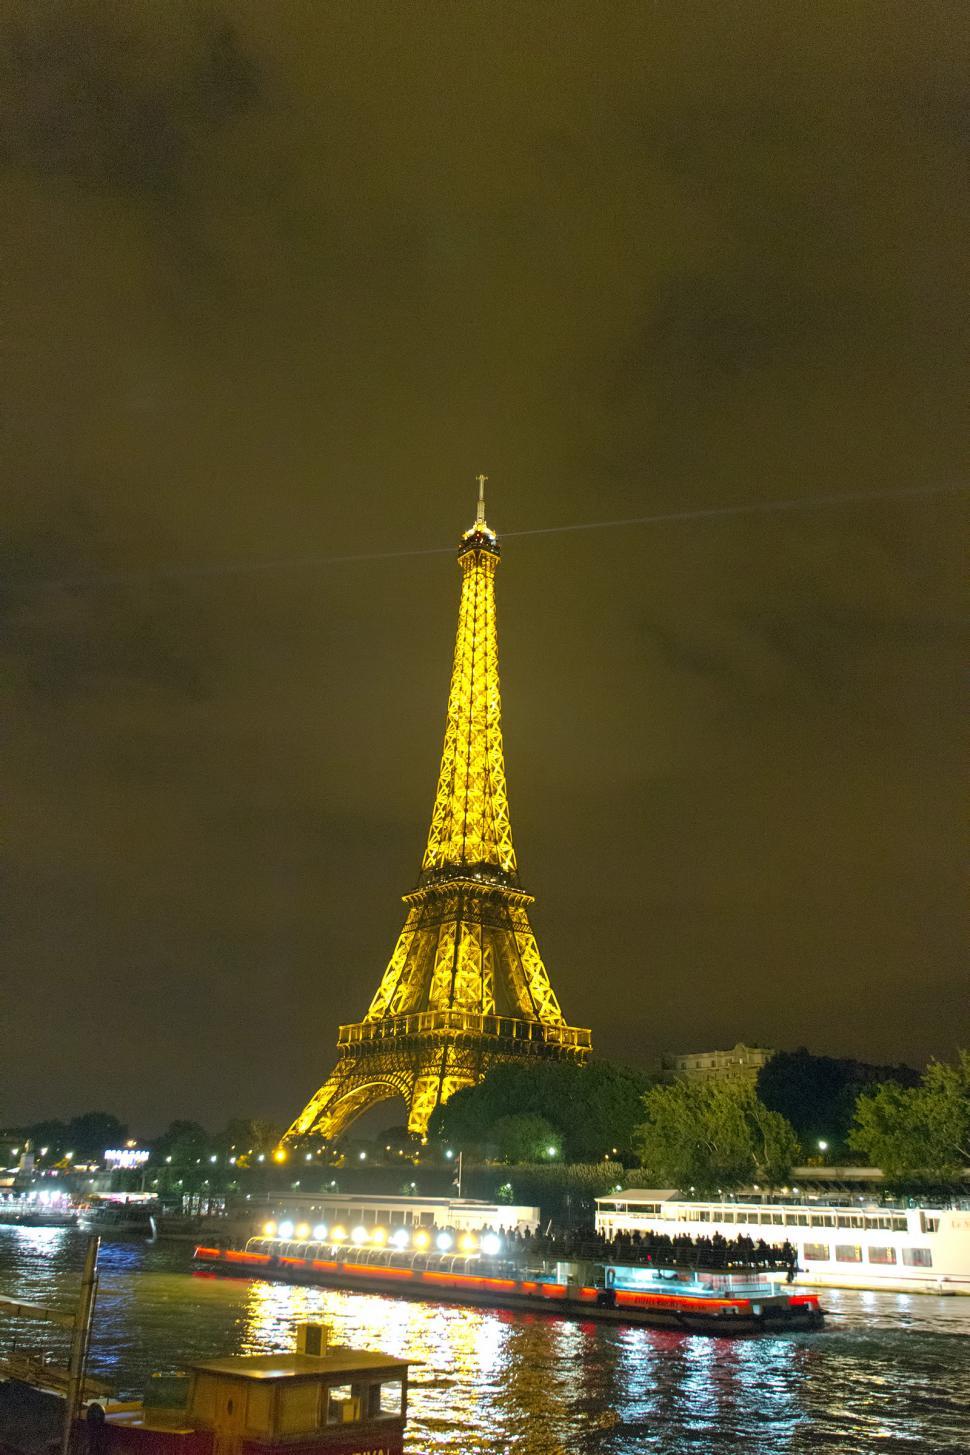 Free Image of Eiffel Tower 